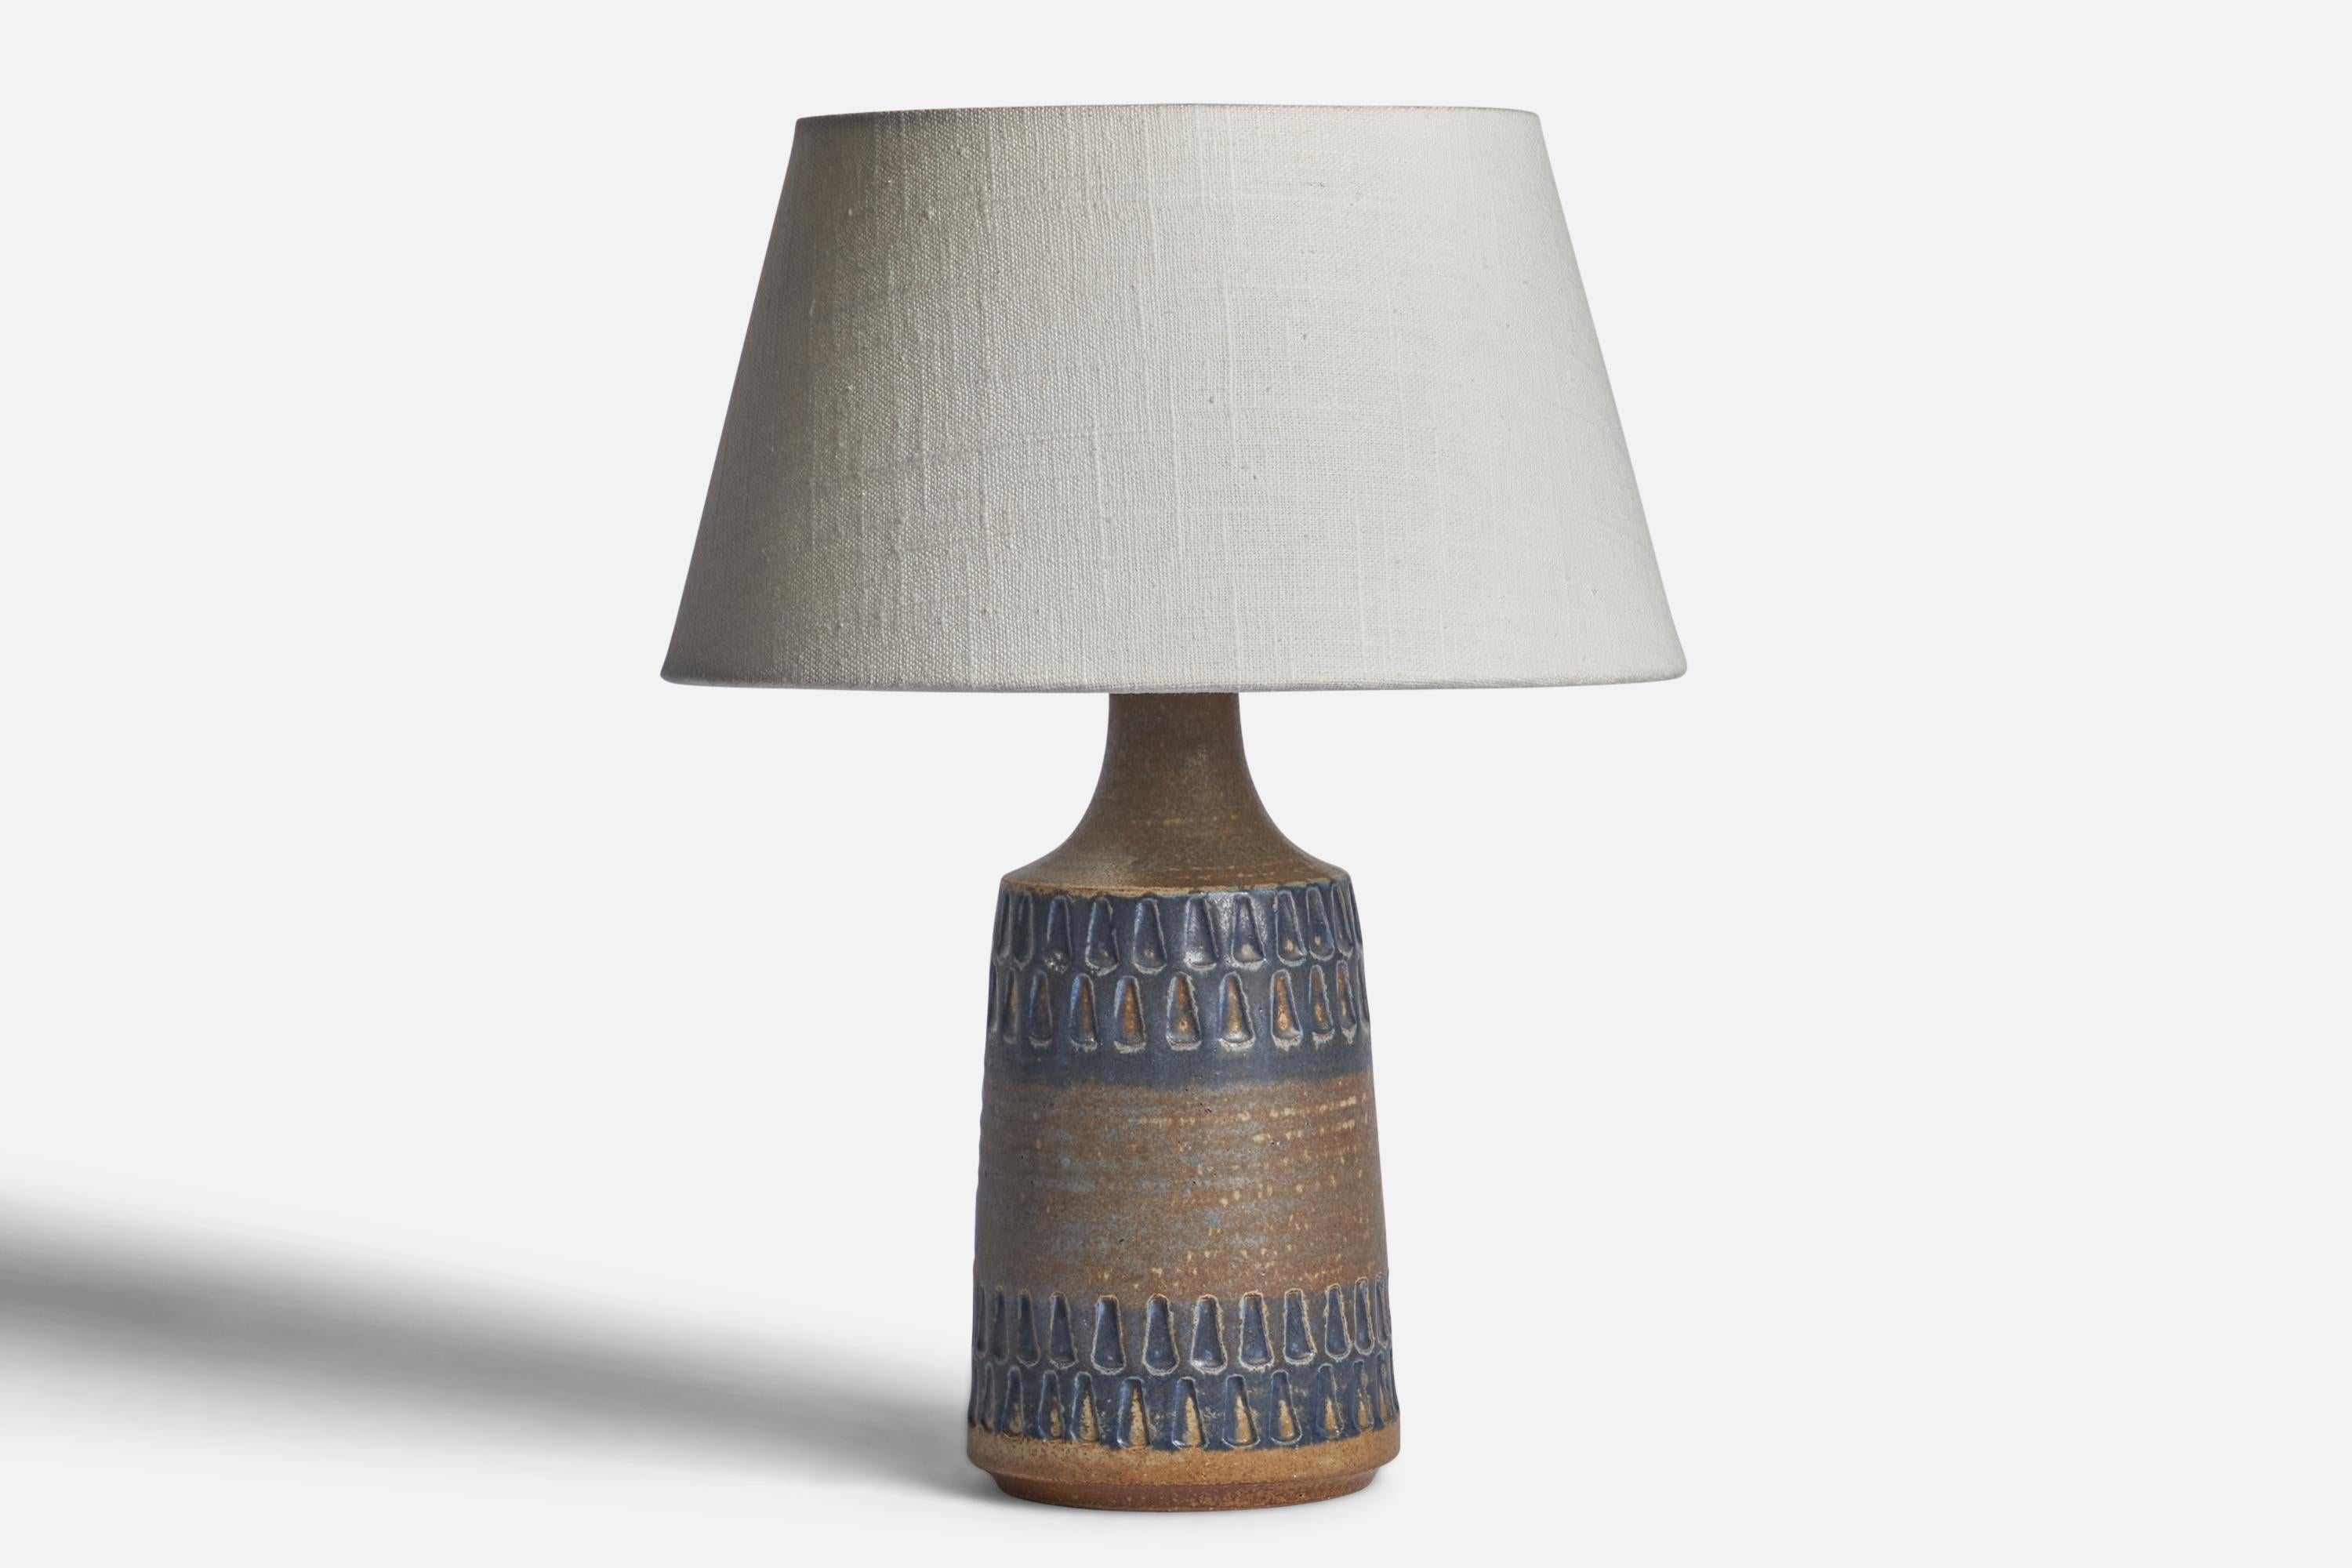 A blue and grey-glazed stoneware table lamp designed and produced by 
Søholm, Bornholm, Denmark, 1960s.

Dimensions of Lamp (inches): 10.5” H x 4.35” Diameter
Dimensions of Shade (inches): 7” Top Diameter x 10” Bottom Diameter x 5.5” H 
Dimensions